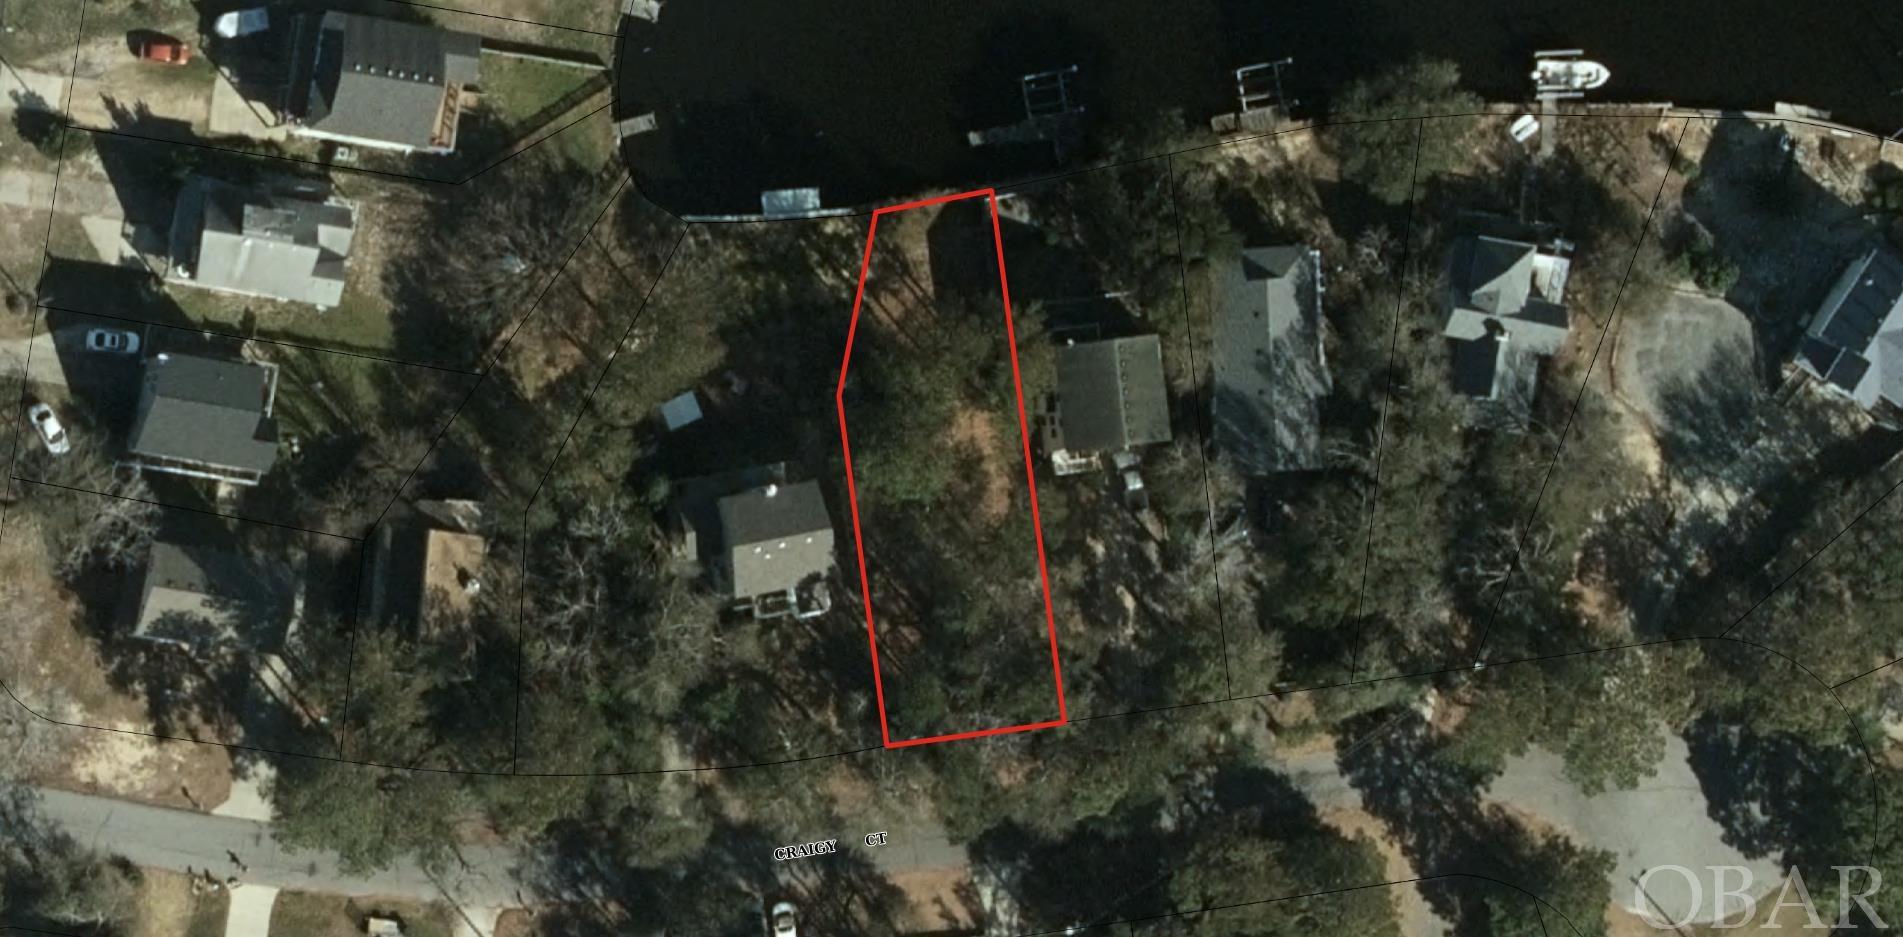 Rare & affordable Canalfront lot available within the gated community of Colington Harbour.  Stake your OBX claim with this elevated homesite, on a quiet low / no traffic cul-de-sac, in a natural treed setting, offering 32' of water frontage. Average elevation at the building pad site is 11', see recent survey, available to buyer at no cost. Colington Harbour is an active community, with amenities that include a Community Clubhouse, marina, boat ramp, Olympic size salt-water pool, baby pool, tennis, and a soundfront park area with a beautiful sandy swimming beach. Lots to do here...sandy beach, community pool, boating, kayak, paddleboard, and direct access to the Albemarle Sound, and beyond. Great year round, or second home location, and water frontage and community amenities offer rental potential if desired. Take advantage of new, improved building materials to build a brand new custom home to your liking, for low maintenance and ease of ownership.  Colington Road improvements and bike path to be completed soon.  Few OBX homesites are available, especially for waterfront / water access, act now to secure your spot. Building information and consultation available.